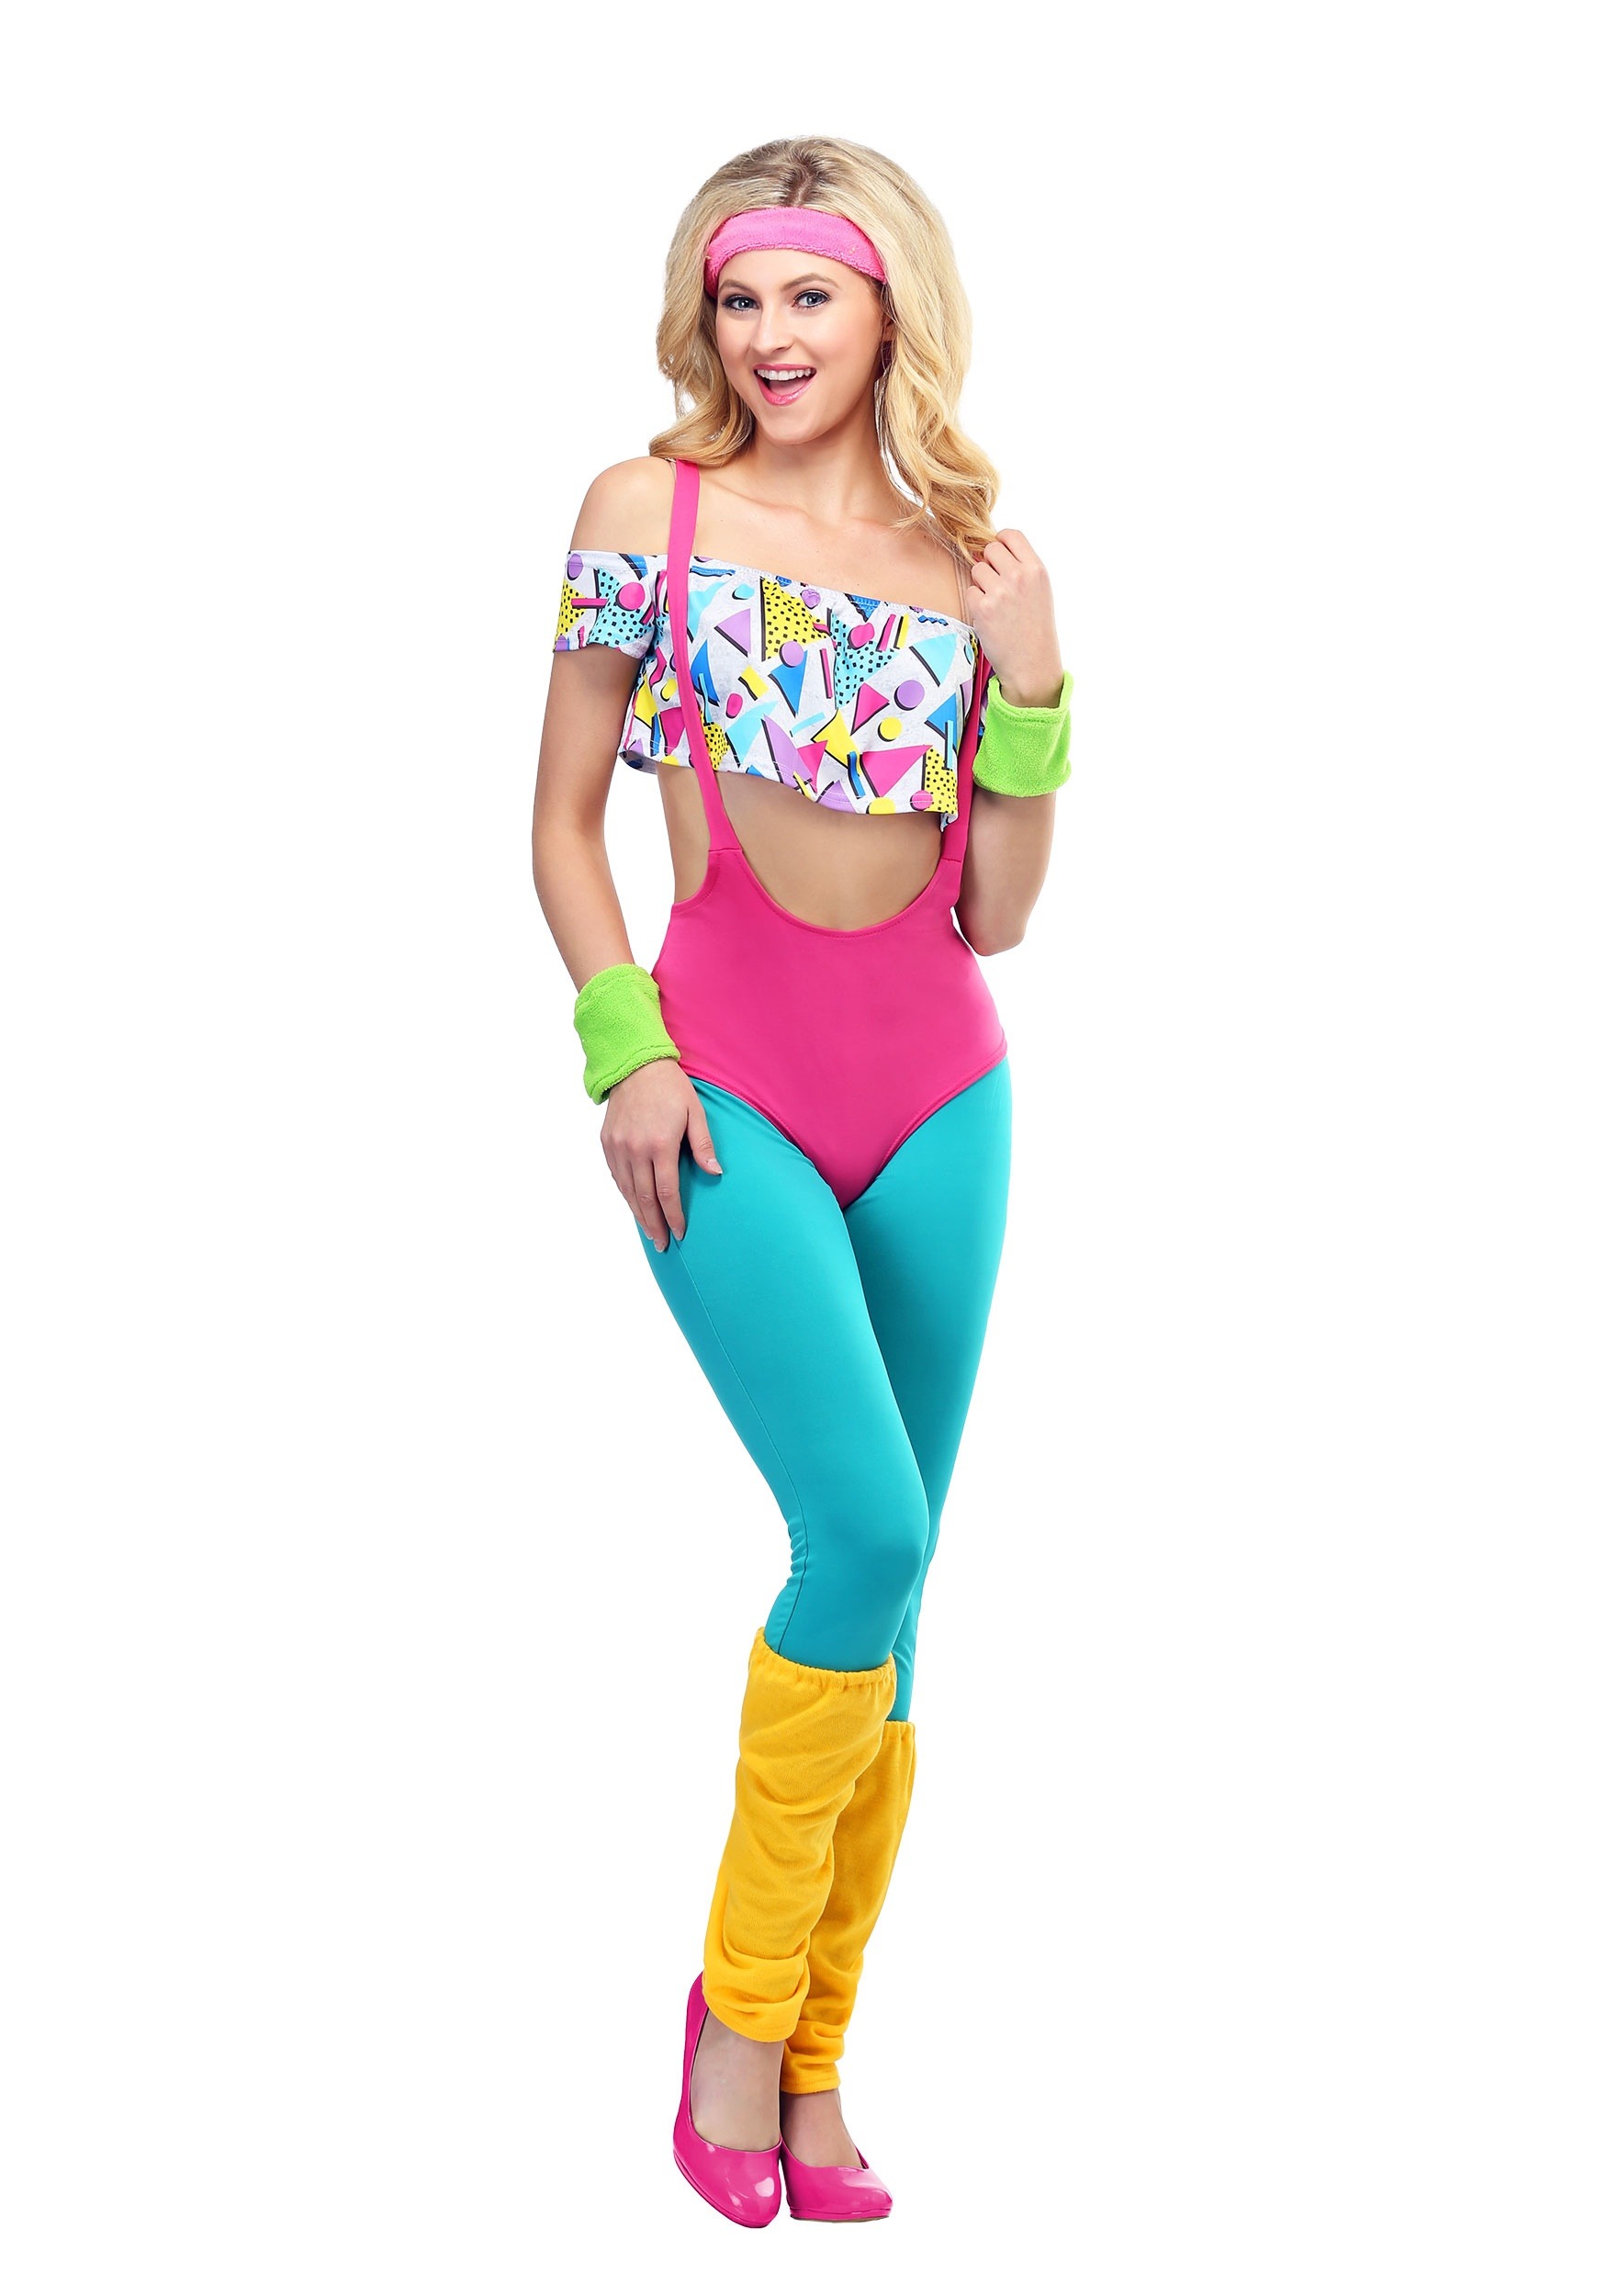 Work It Out Womens 80s Costume